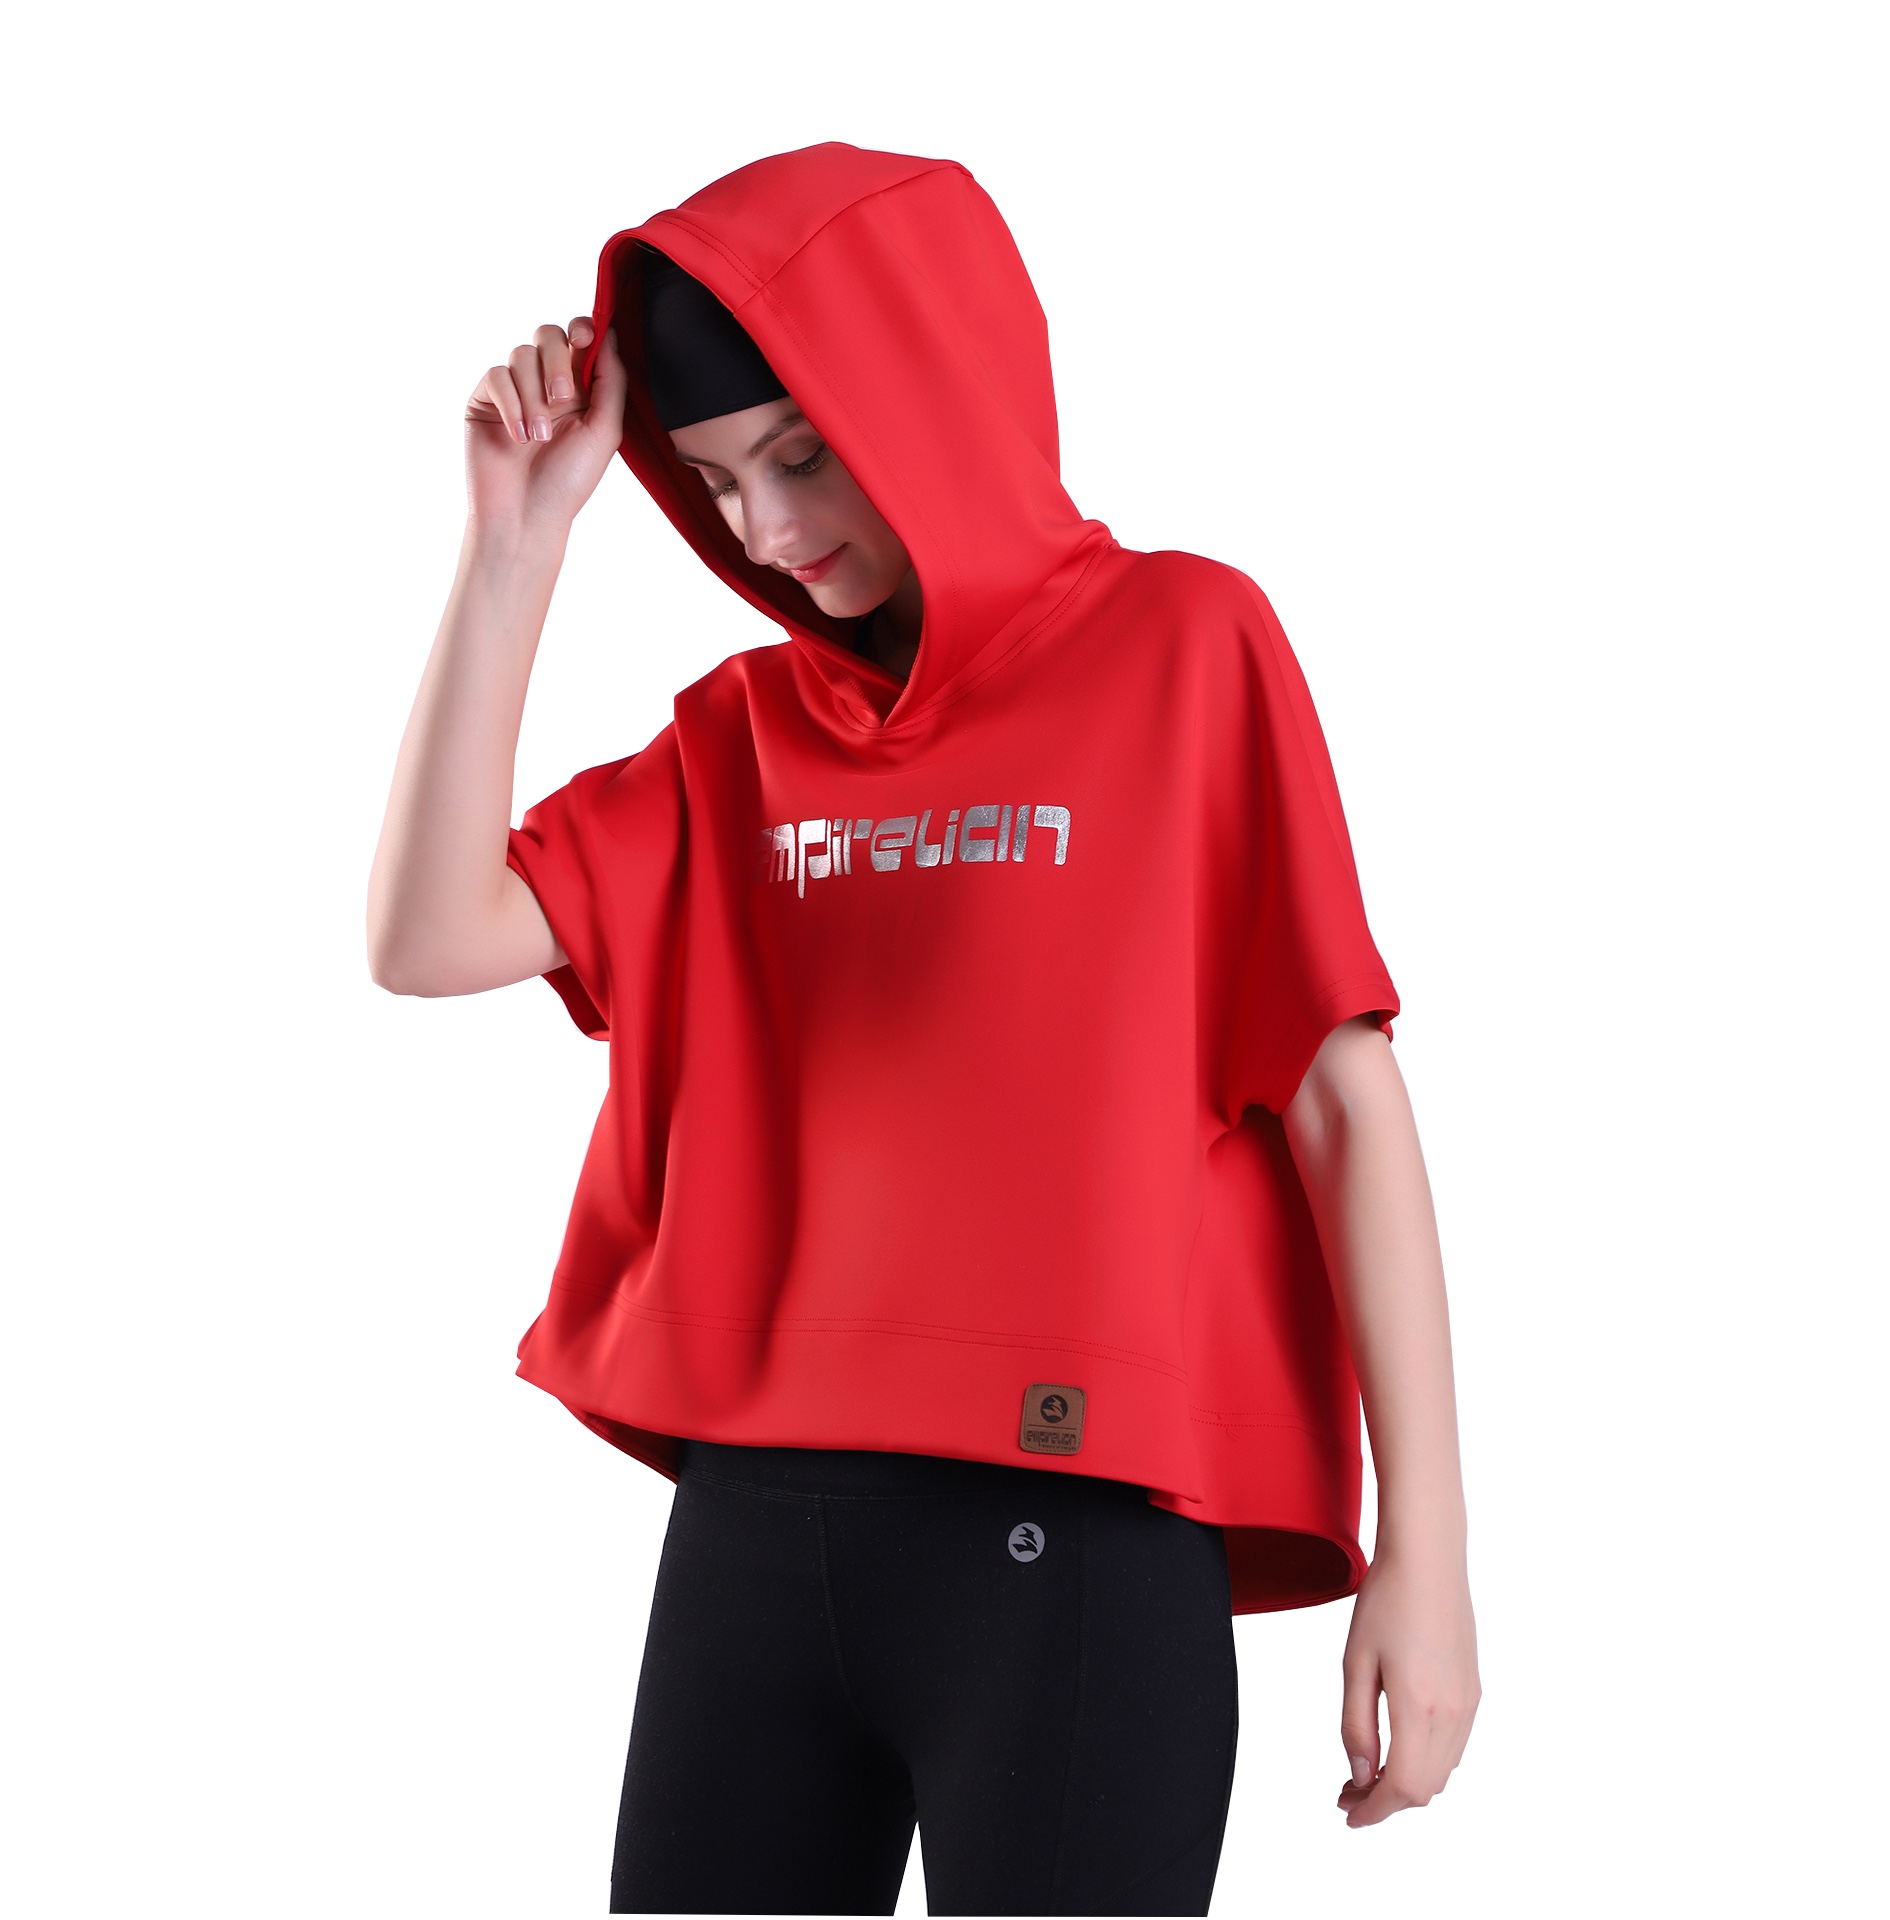 Women's Cropped Hoodies Loose Cute Athletic Pullover Sports Casual Tops